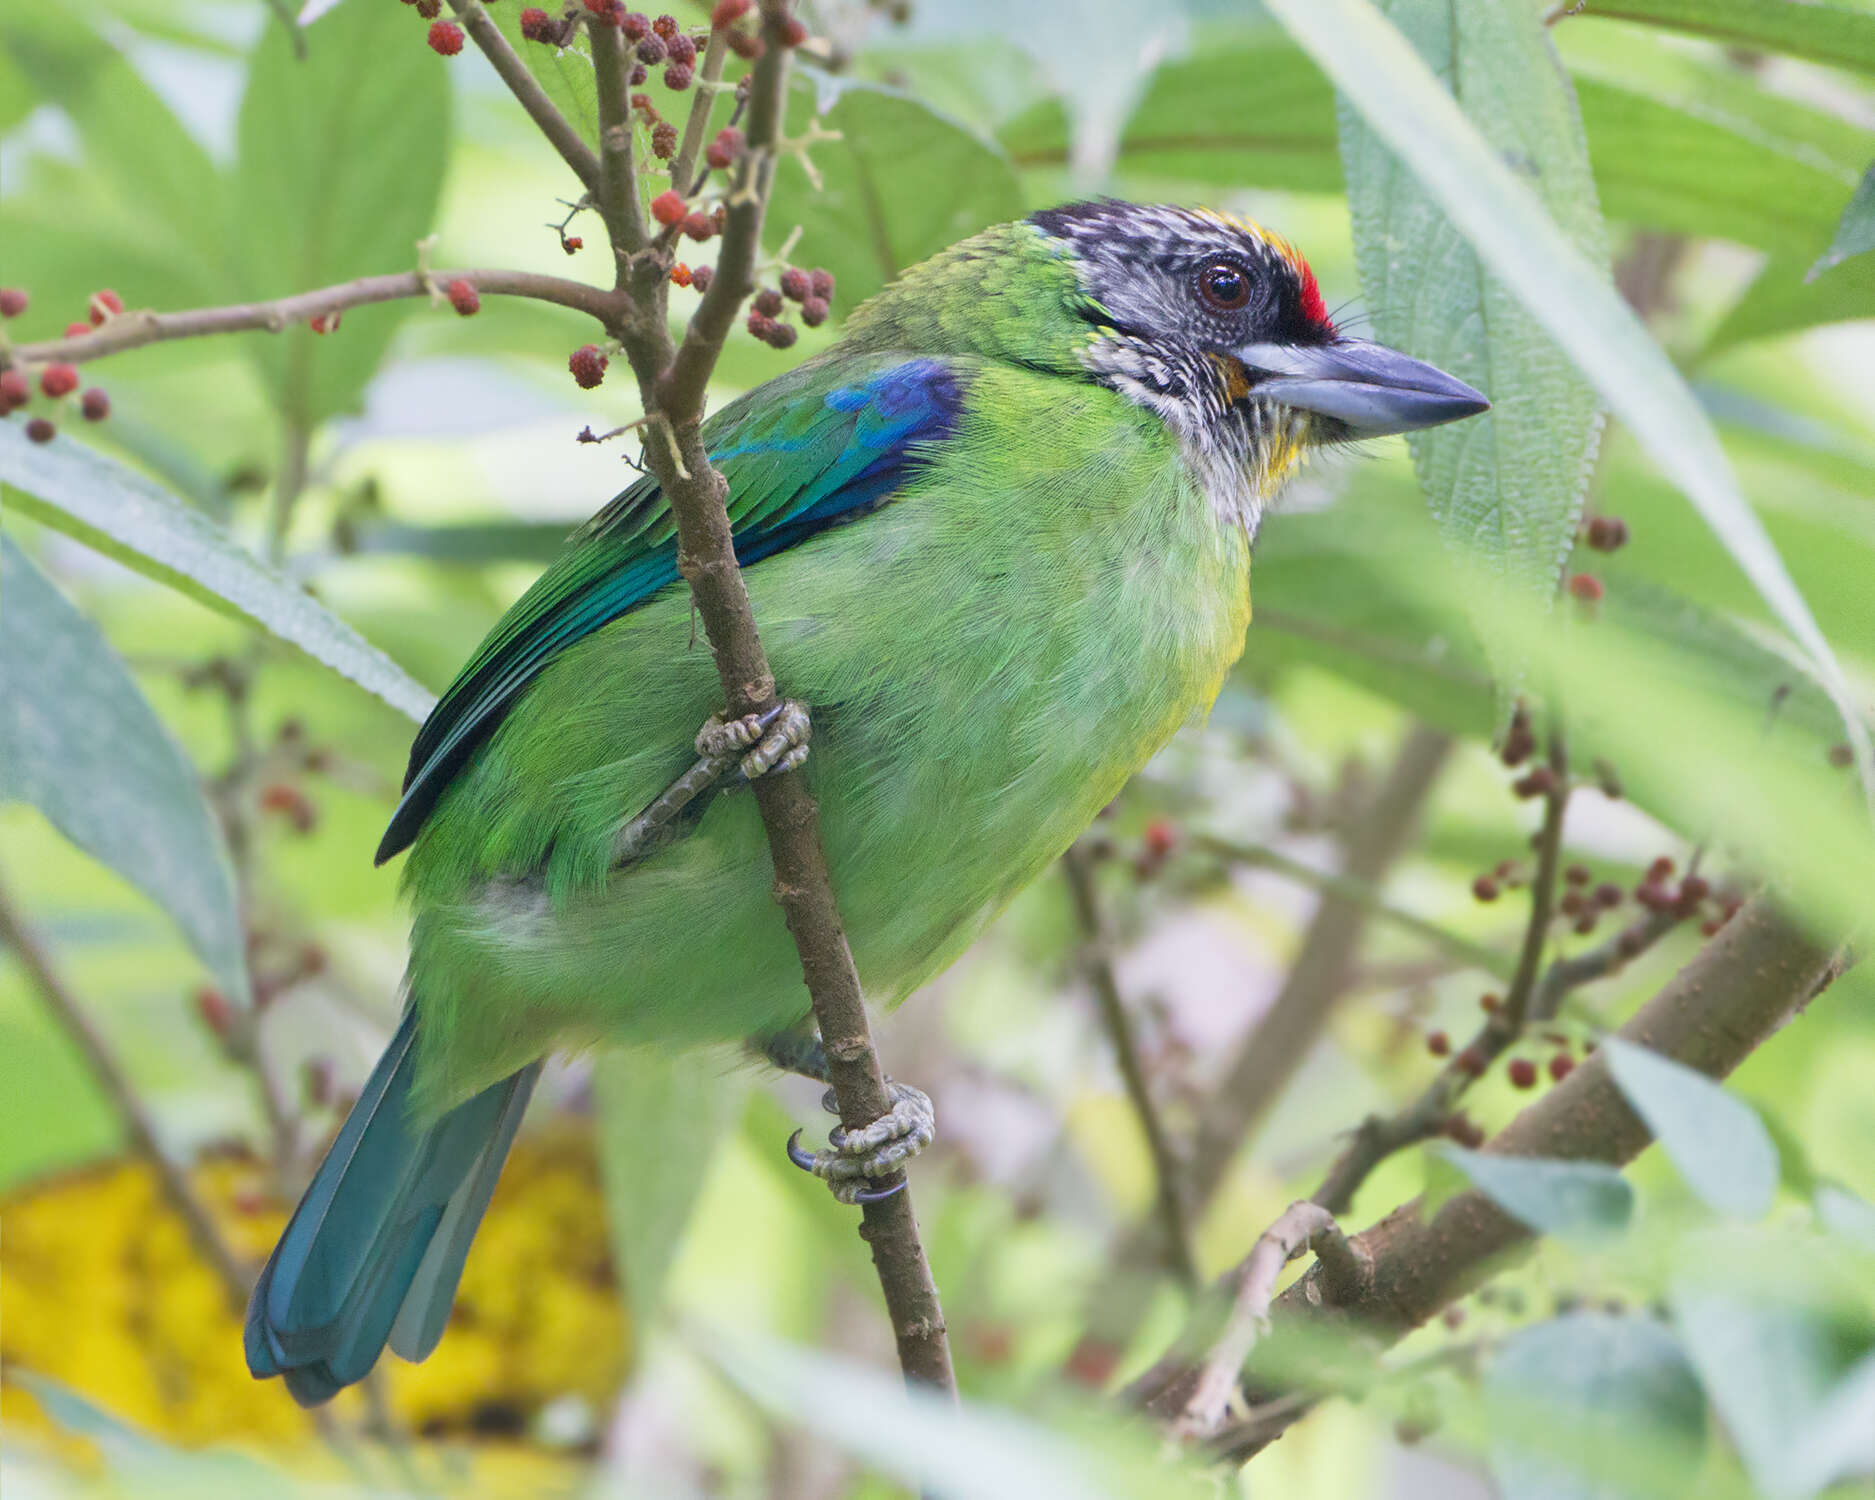 Image of Asian barbets